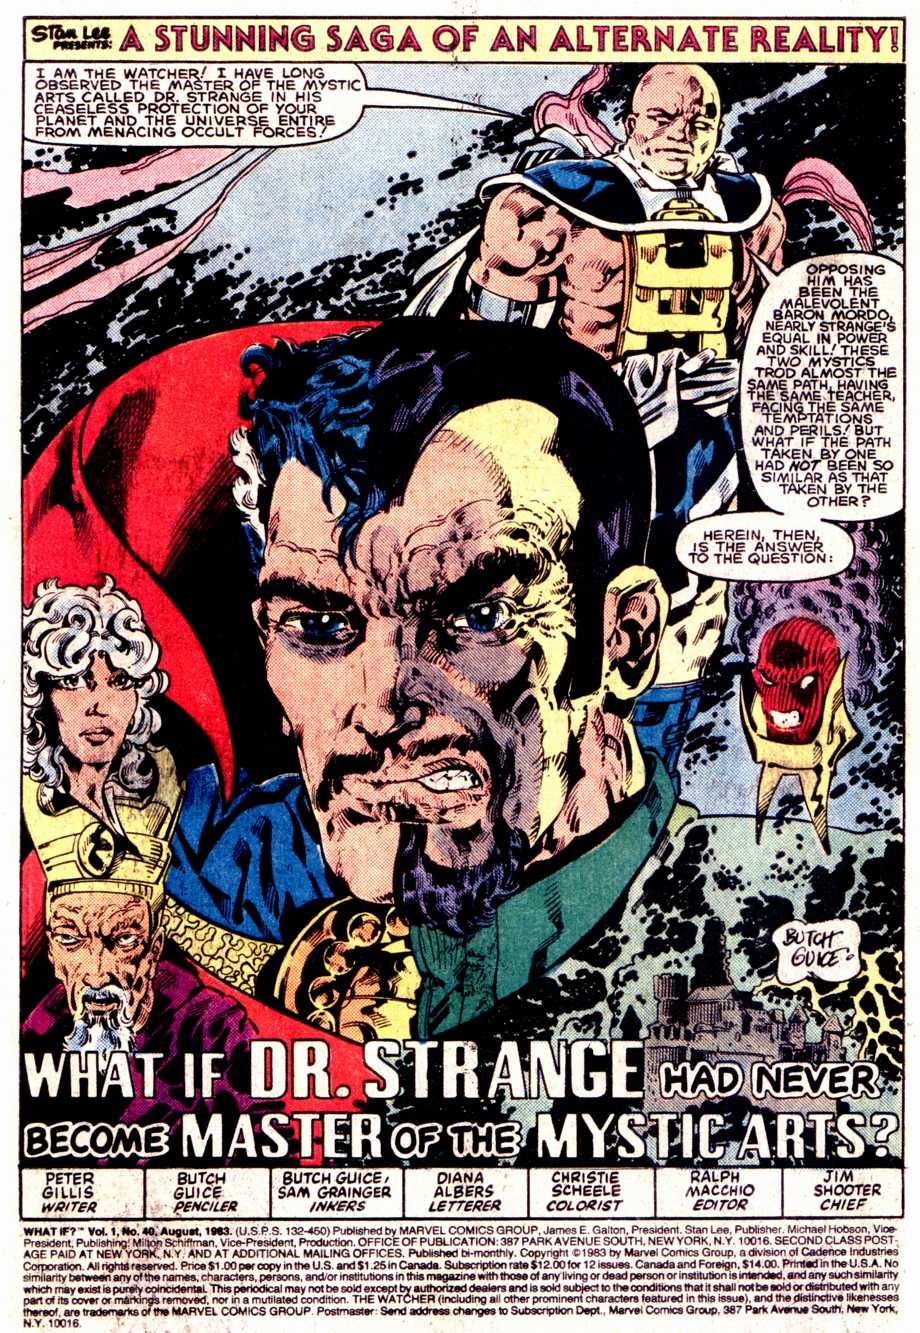 What If? (1977) #40_-_Dr_Strange_had_not_become_master_of_The_mystic_arts #40 - English 2